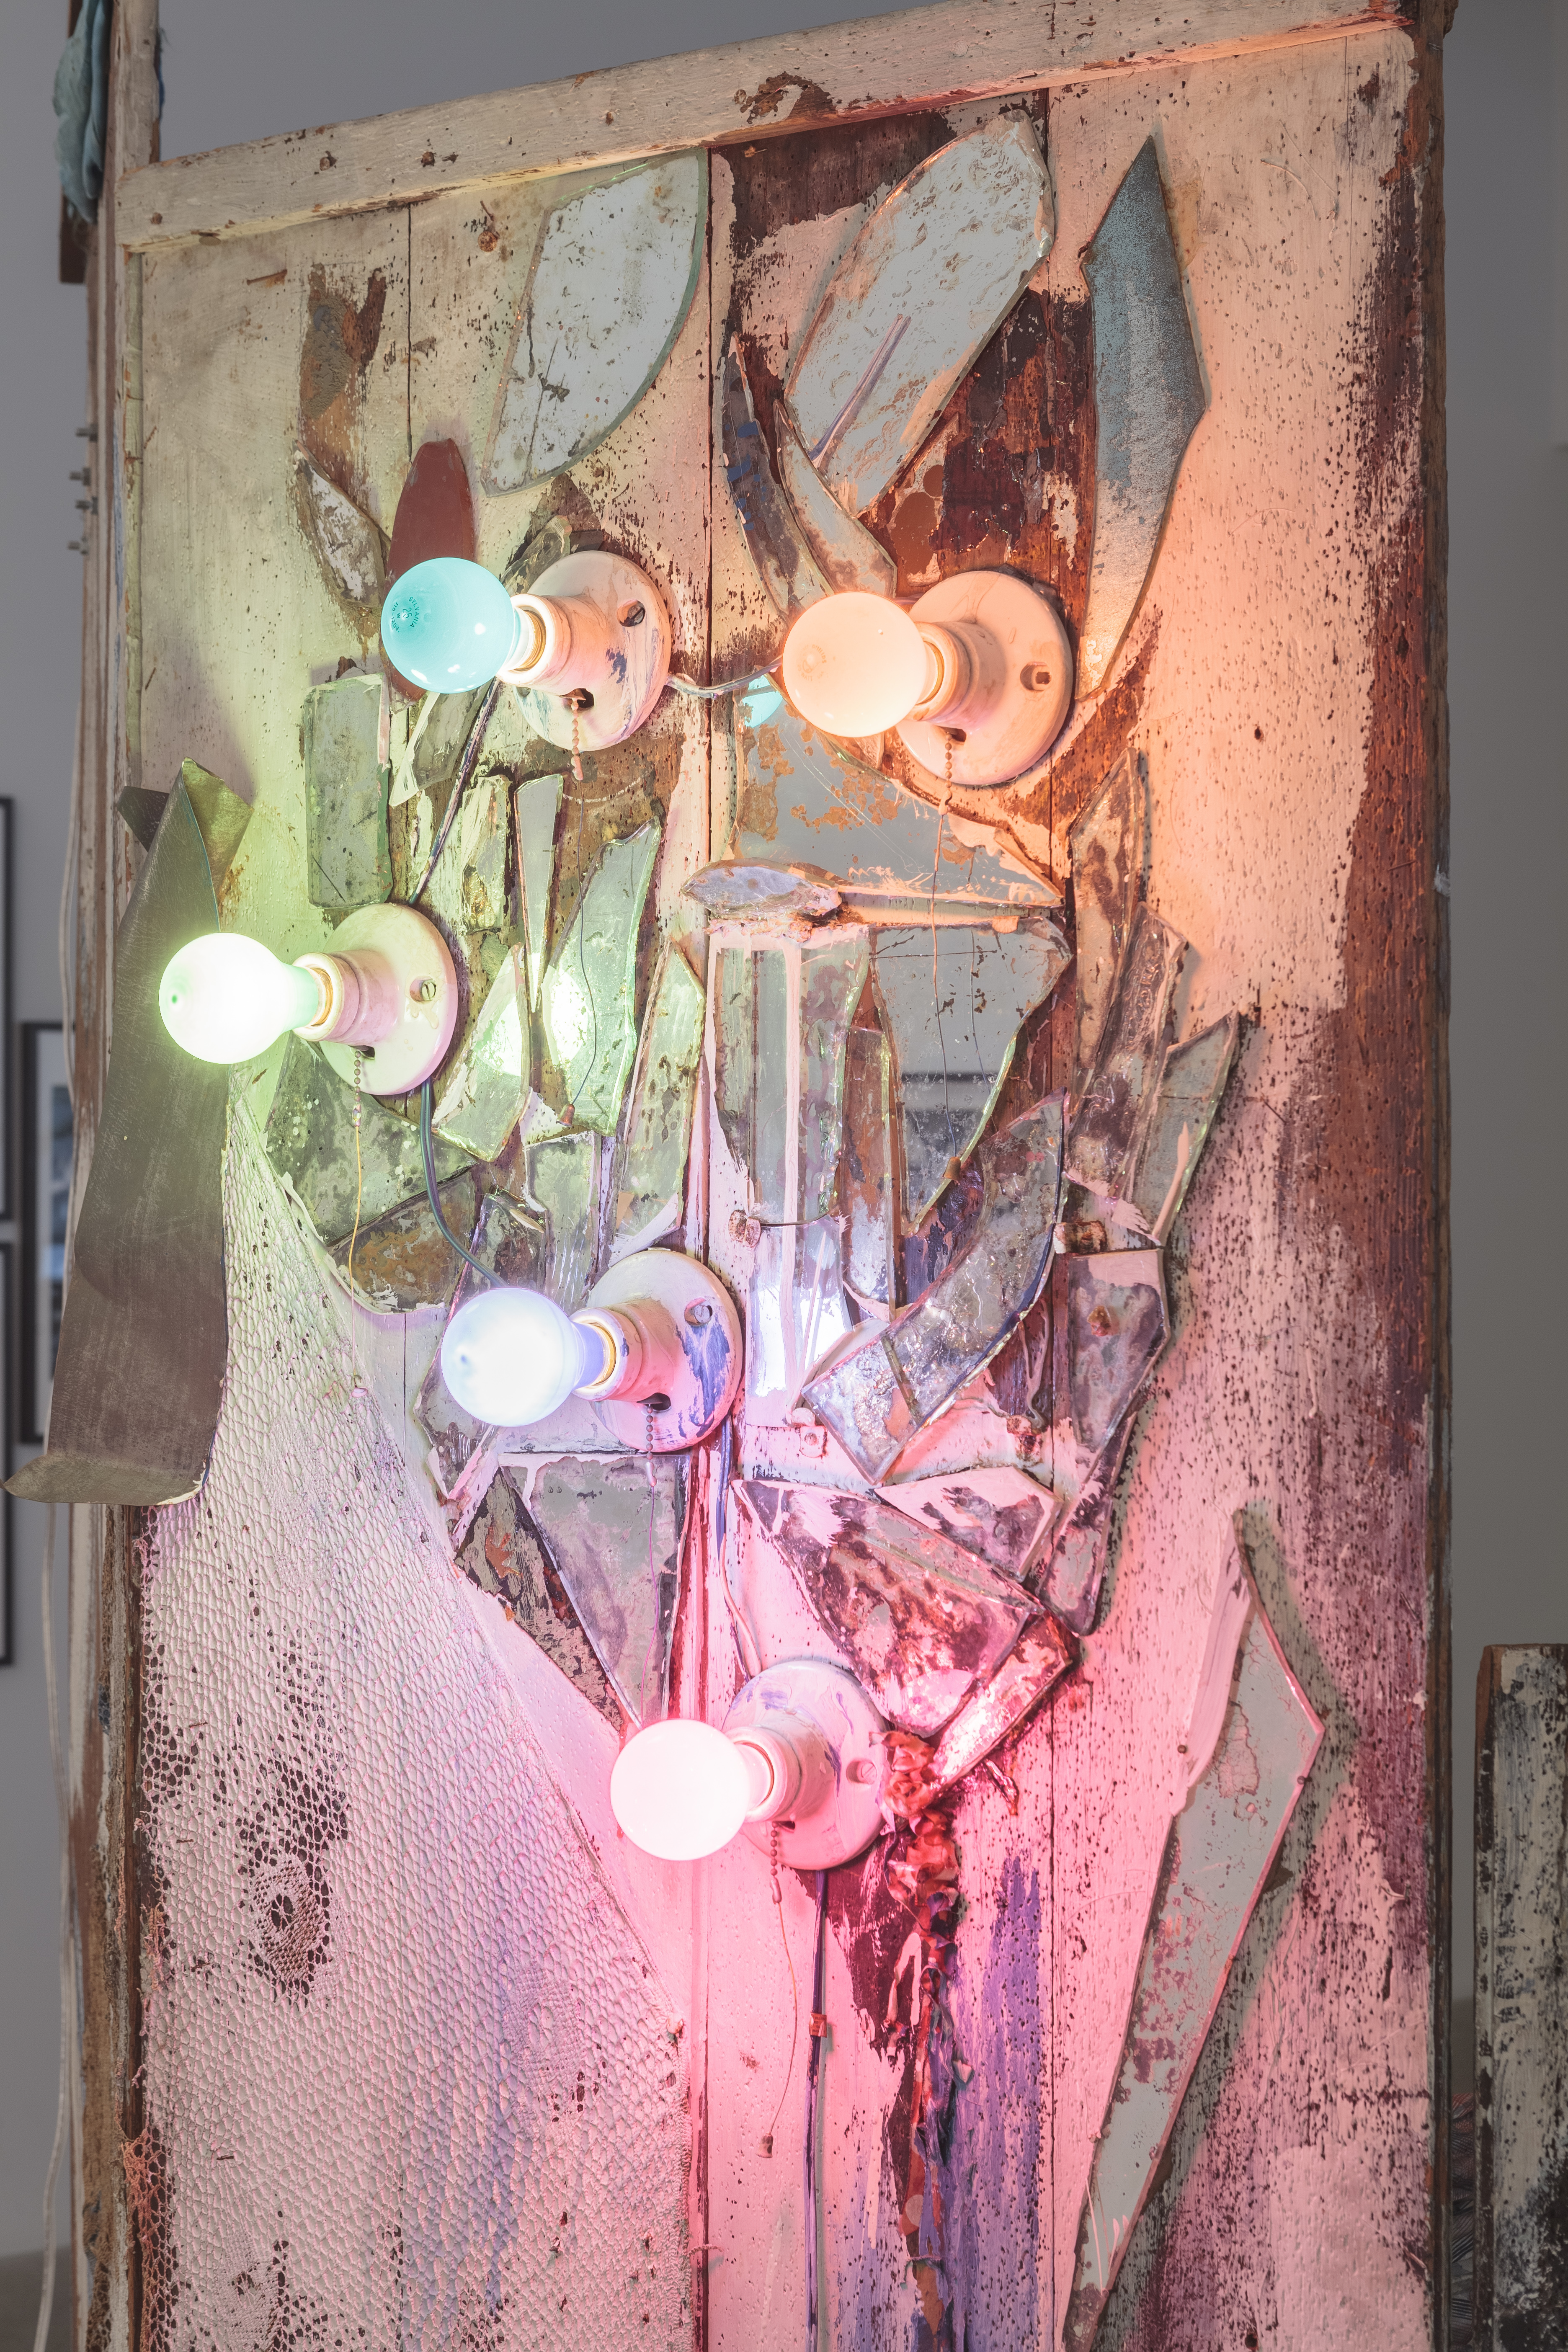 close up image of part of the work: lightbulbs of different colors and shattered glass